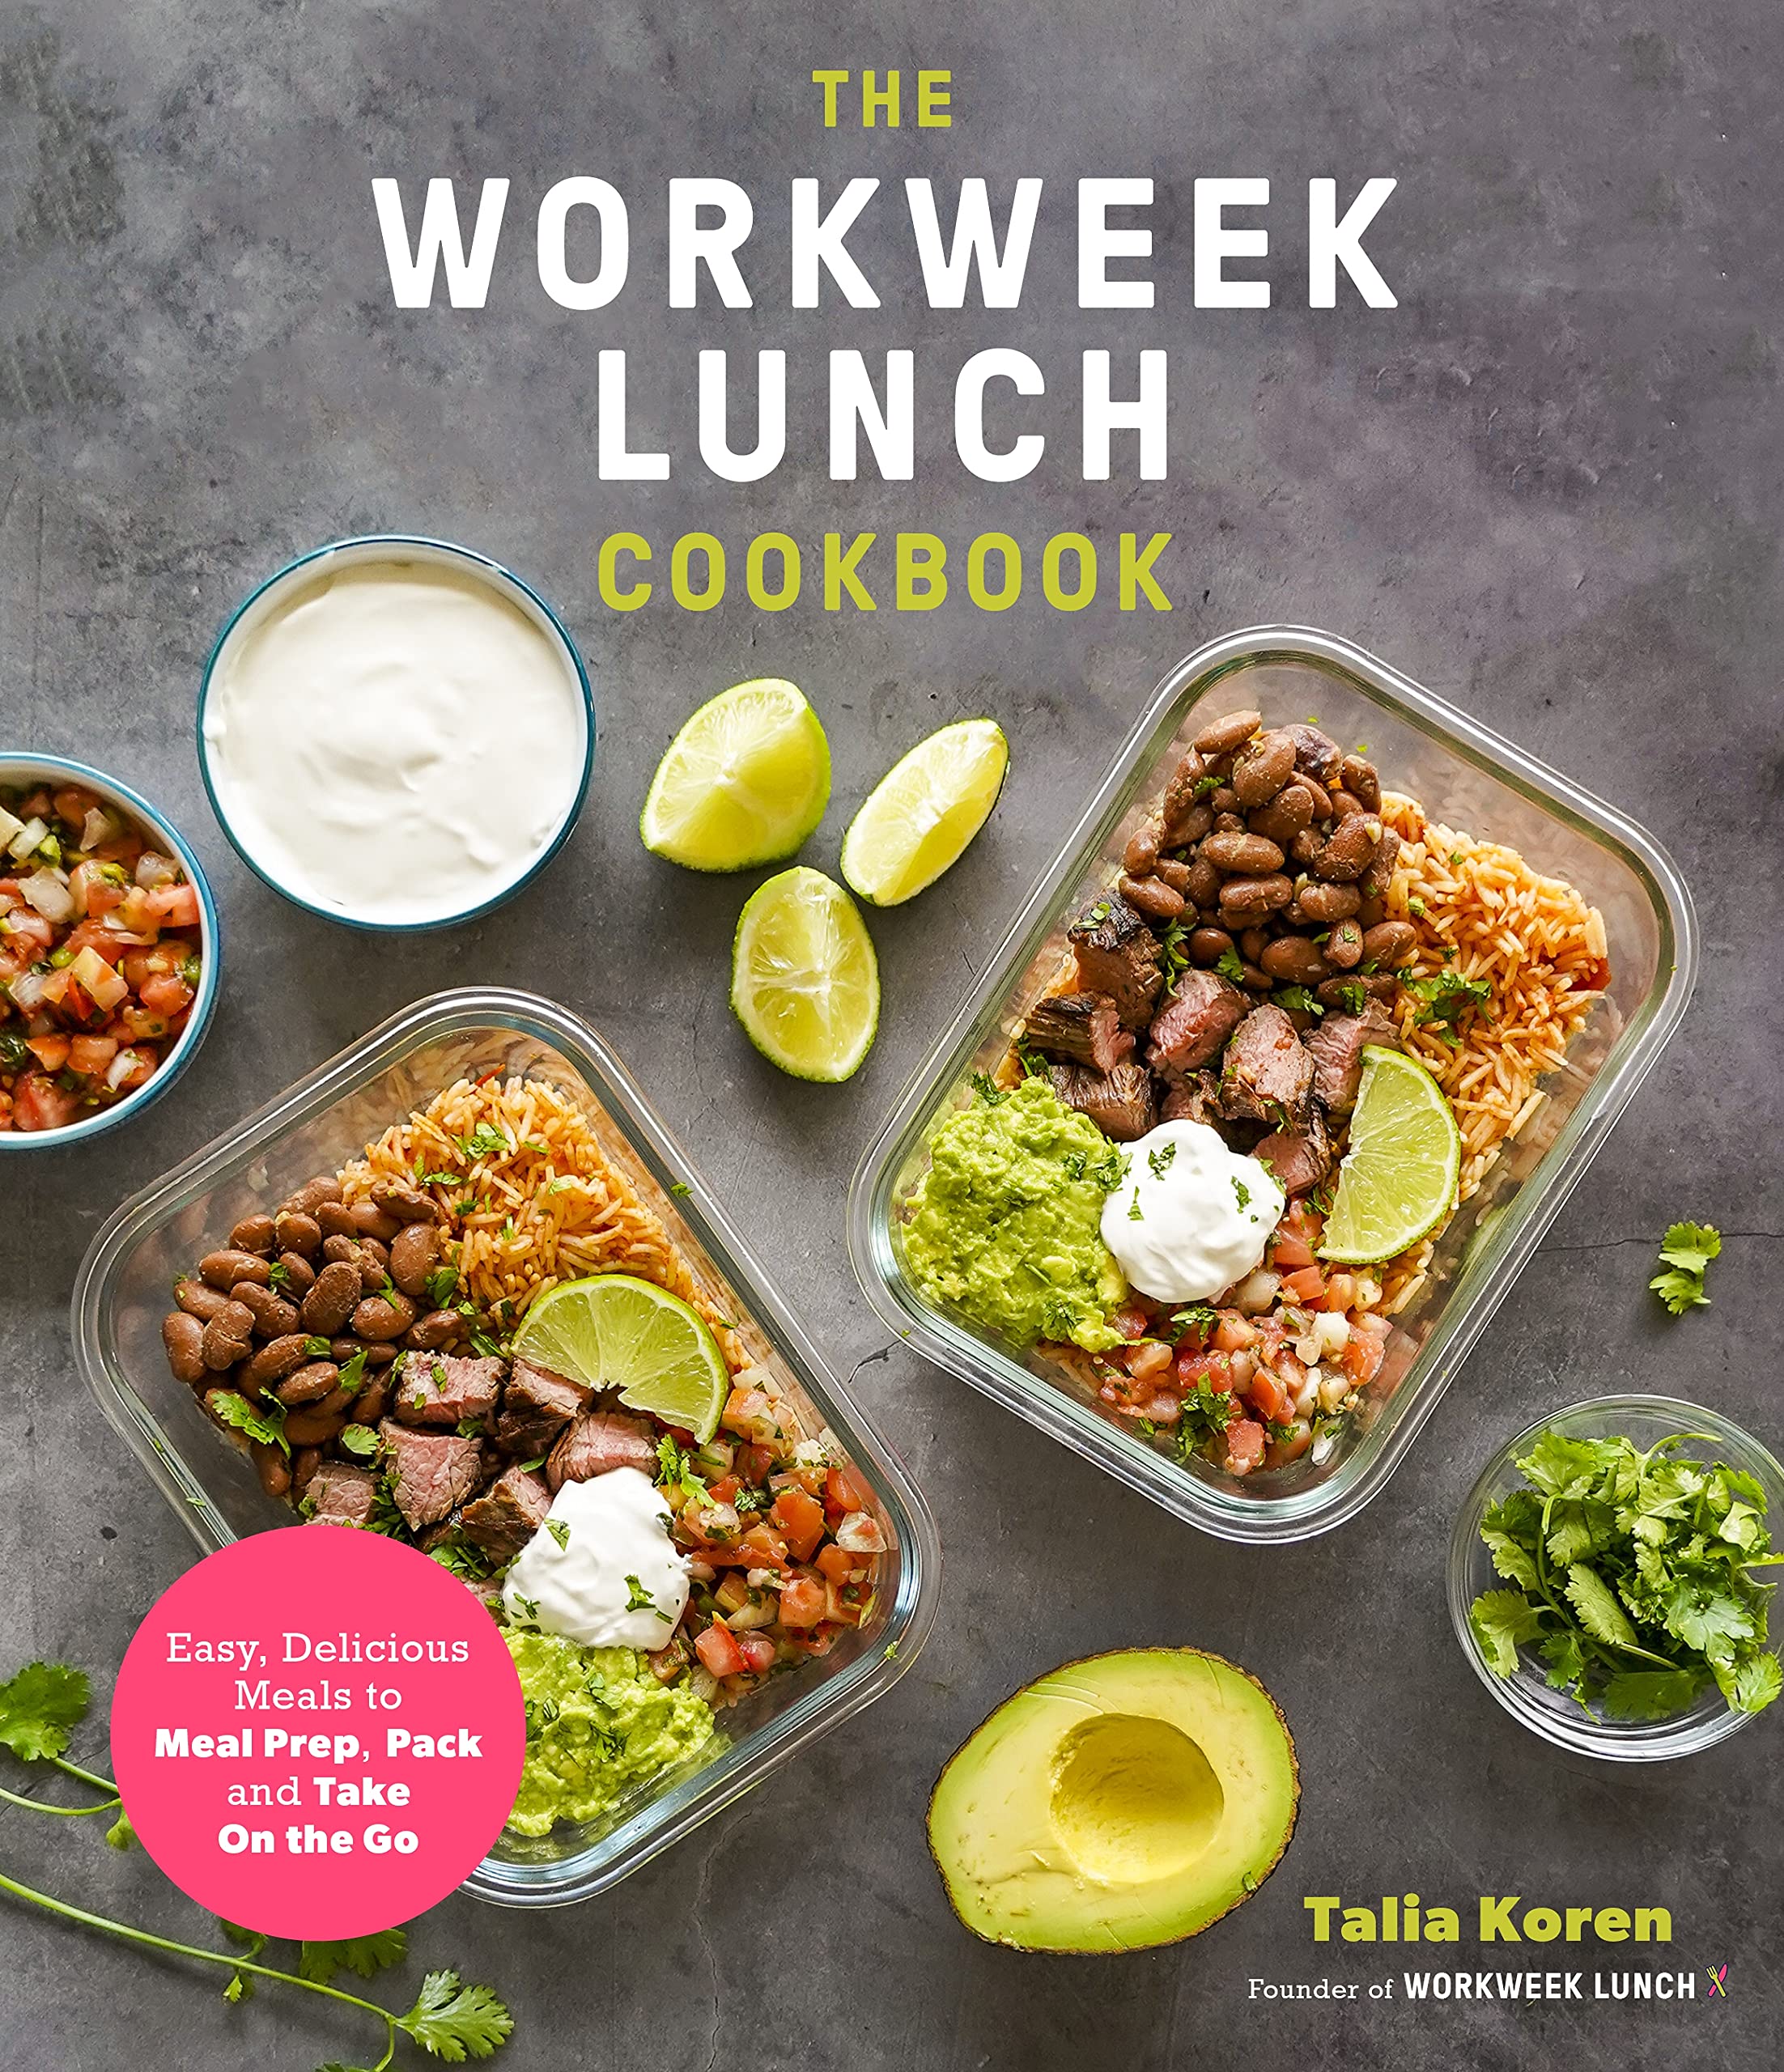 The Workweek Lunch Cookbook: Easy, Delicious Meals to Meal Prep, Pack and Take On the Go (Talia Koren)